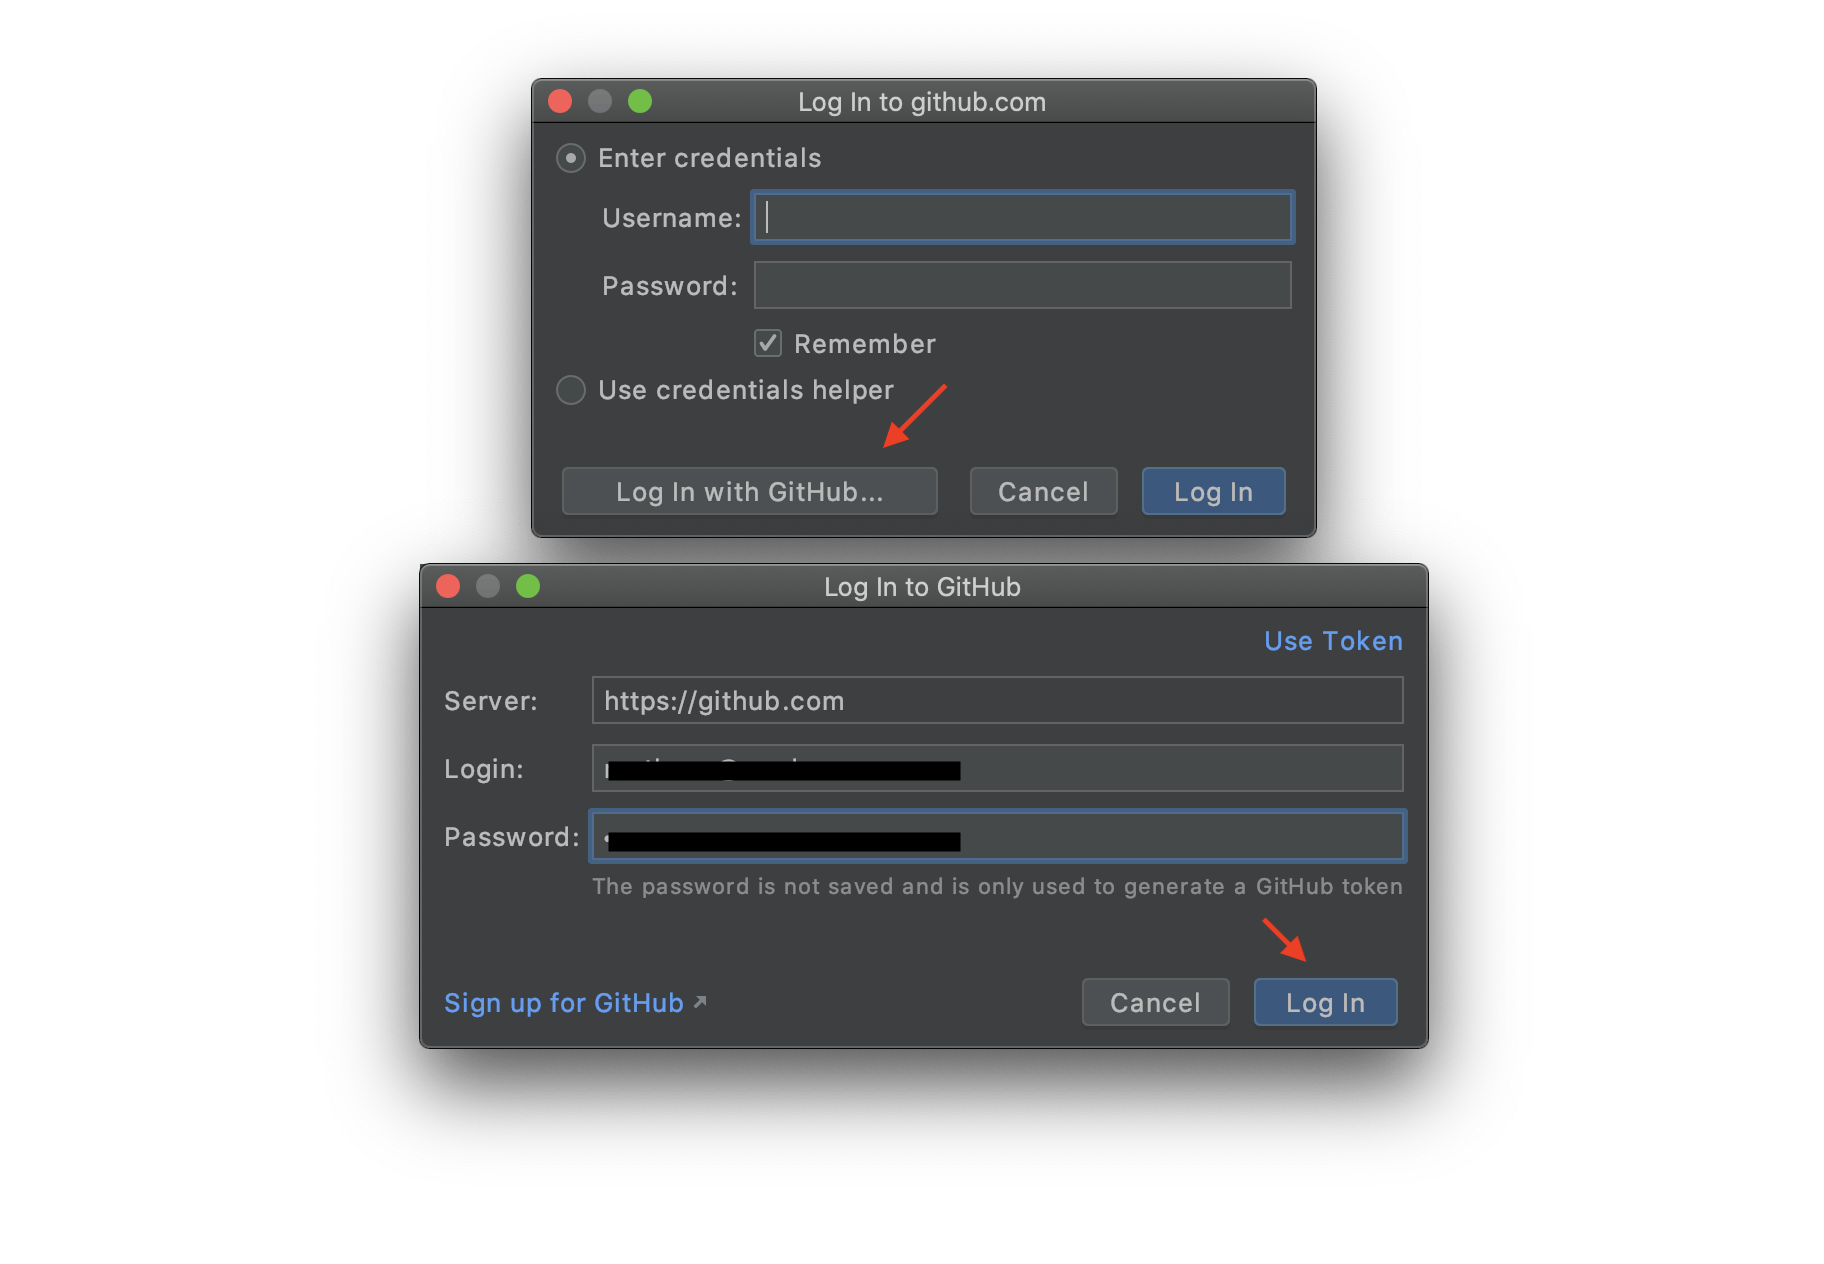 Image shows dialogs to authenticate with GitHub